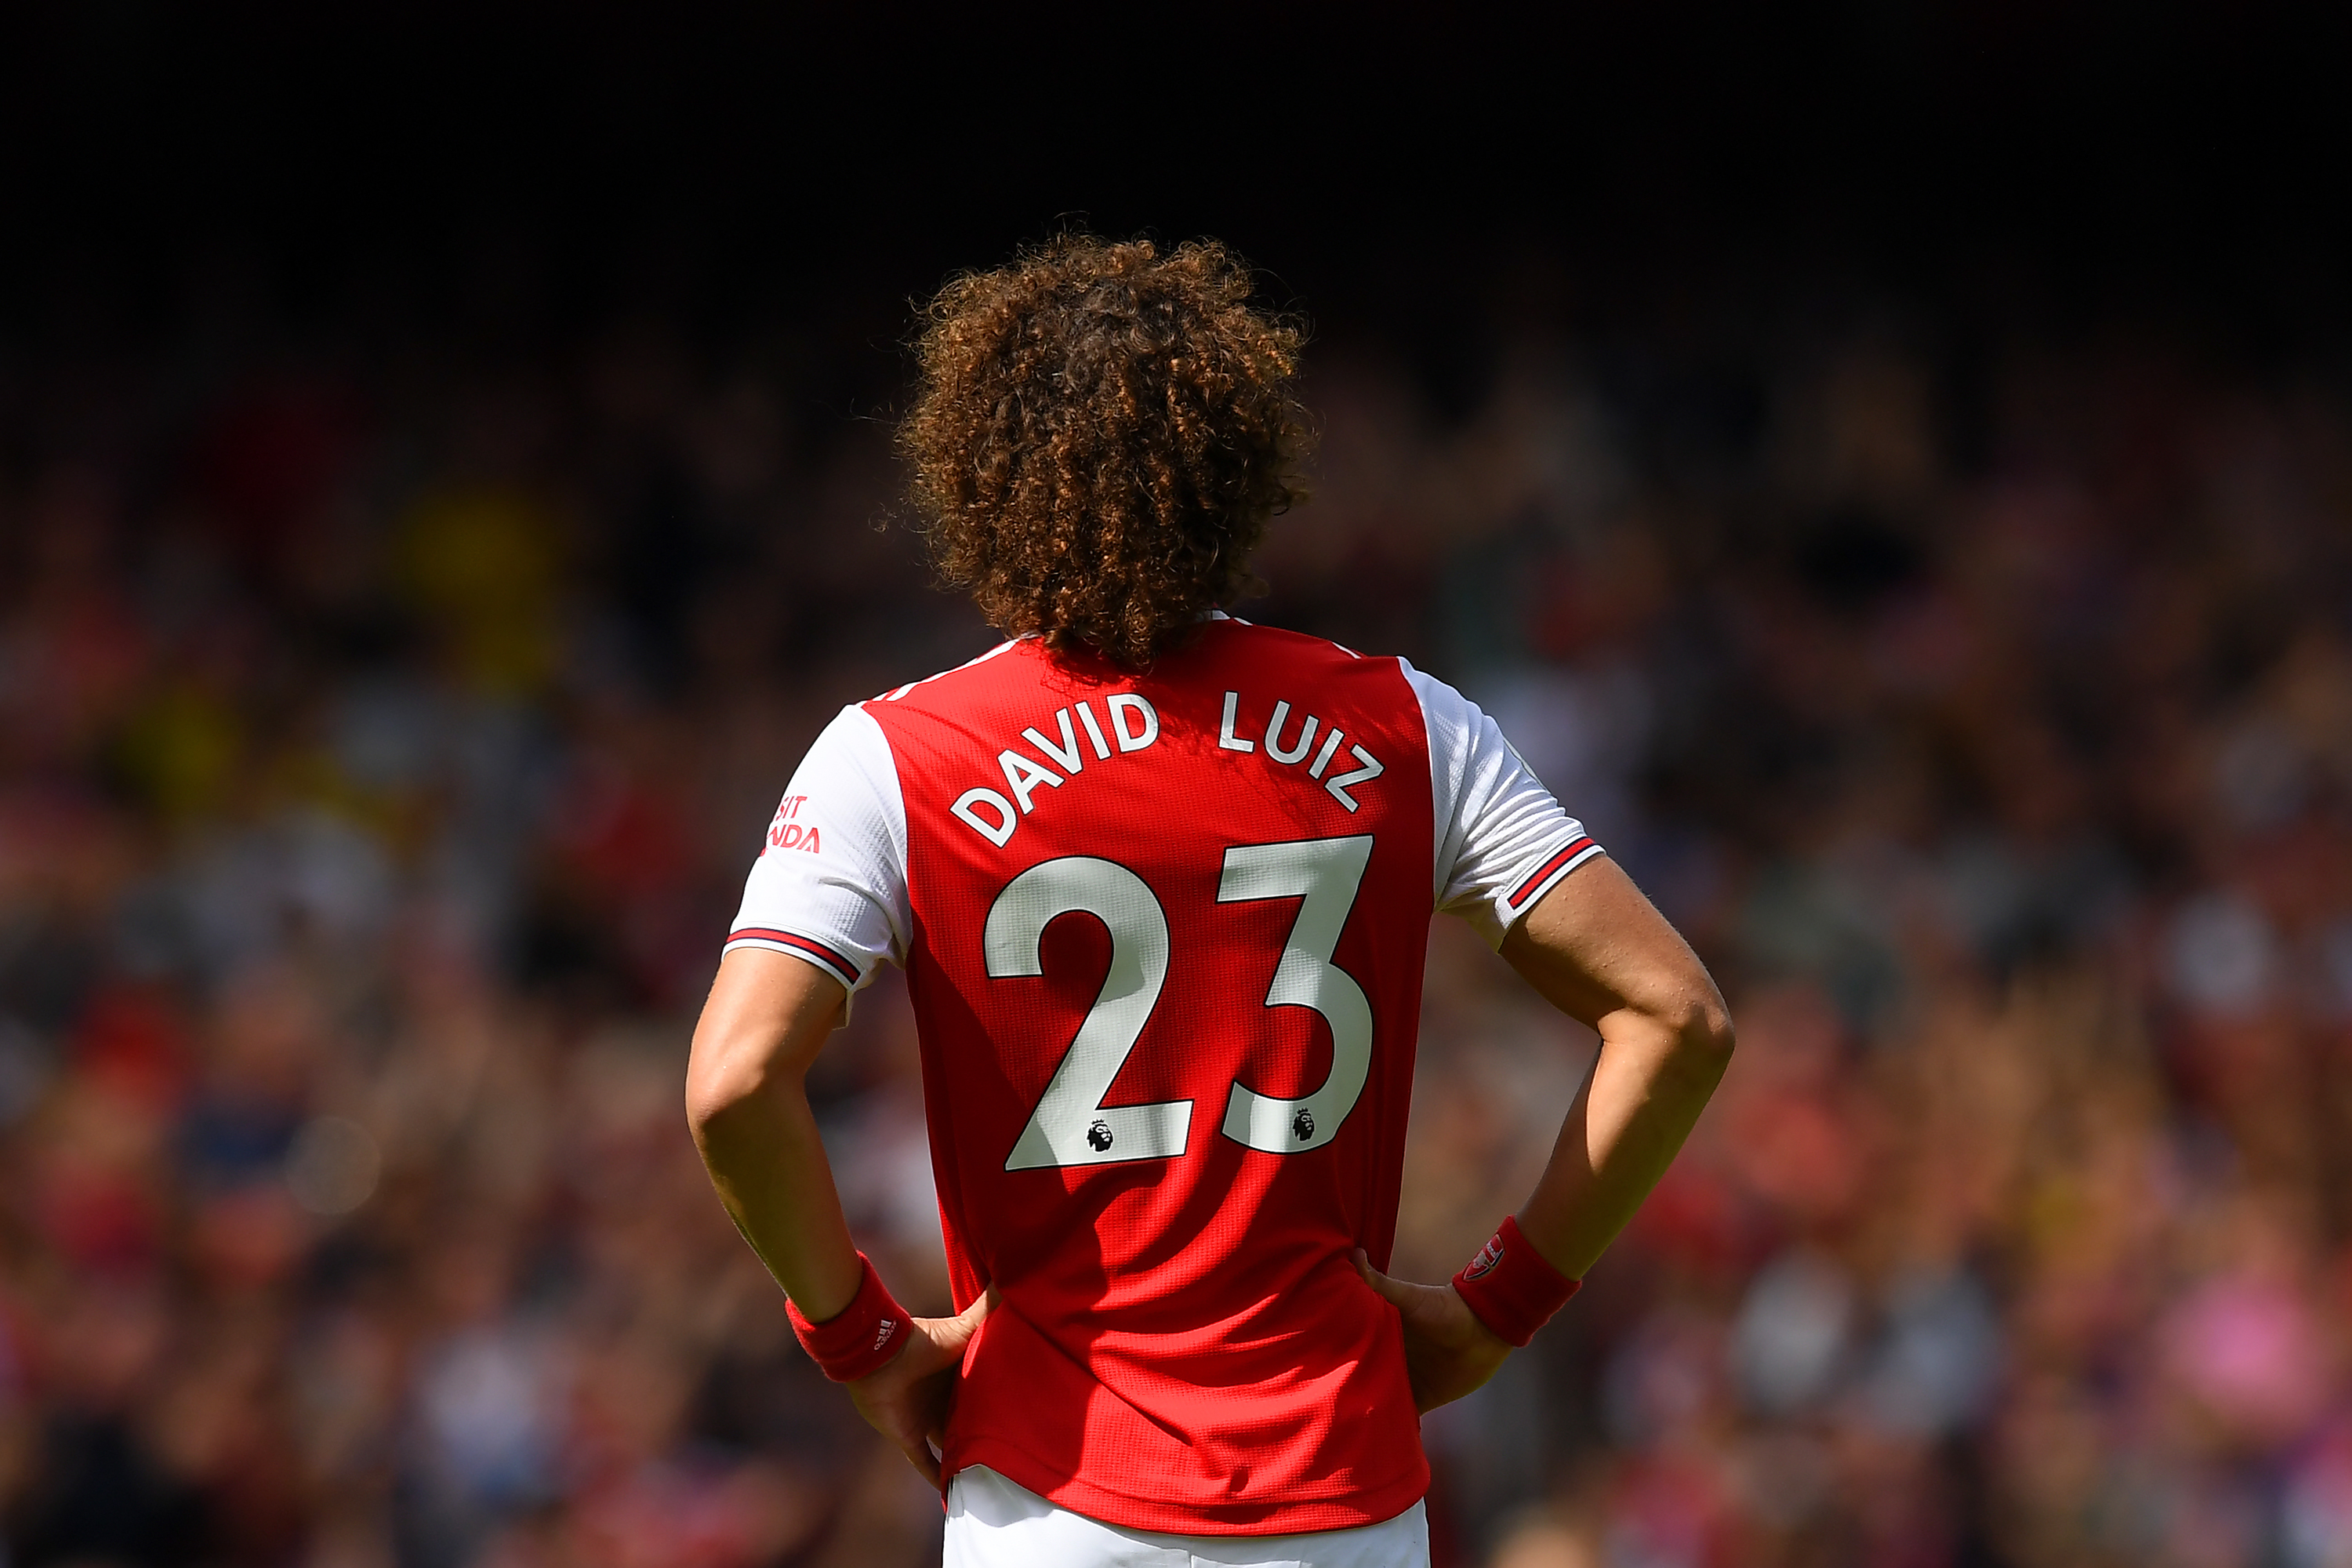 David Luiz is fit and in contention to start for Arsenal against West Ham United. (Photo by Michael Regan/Getty Images)